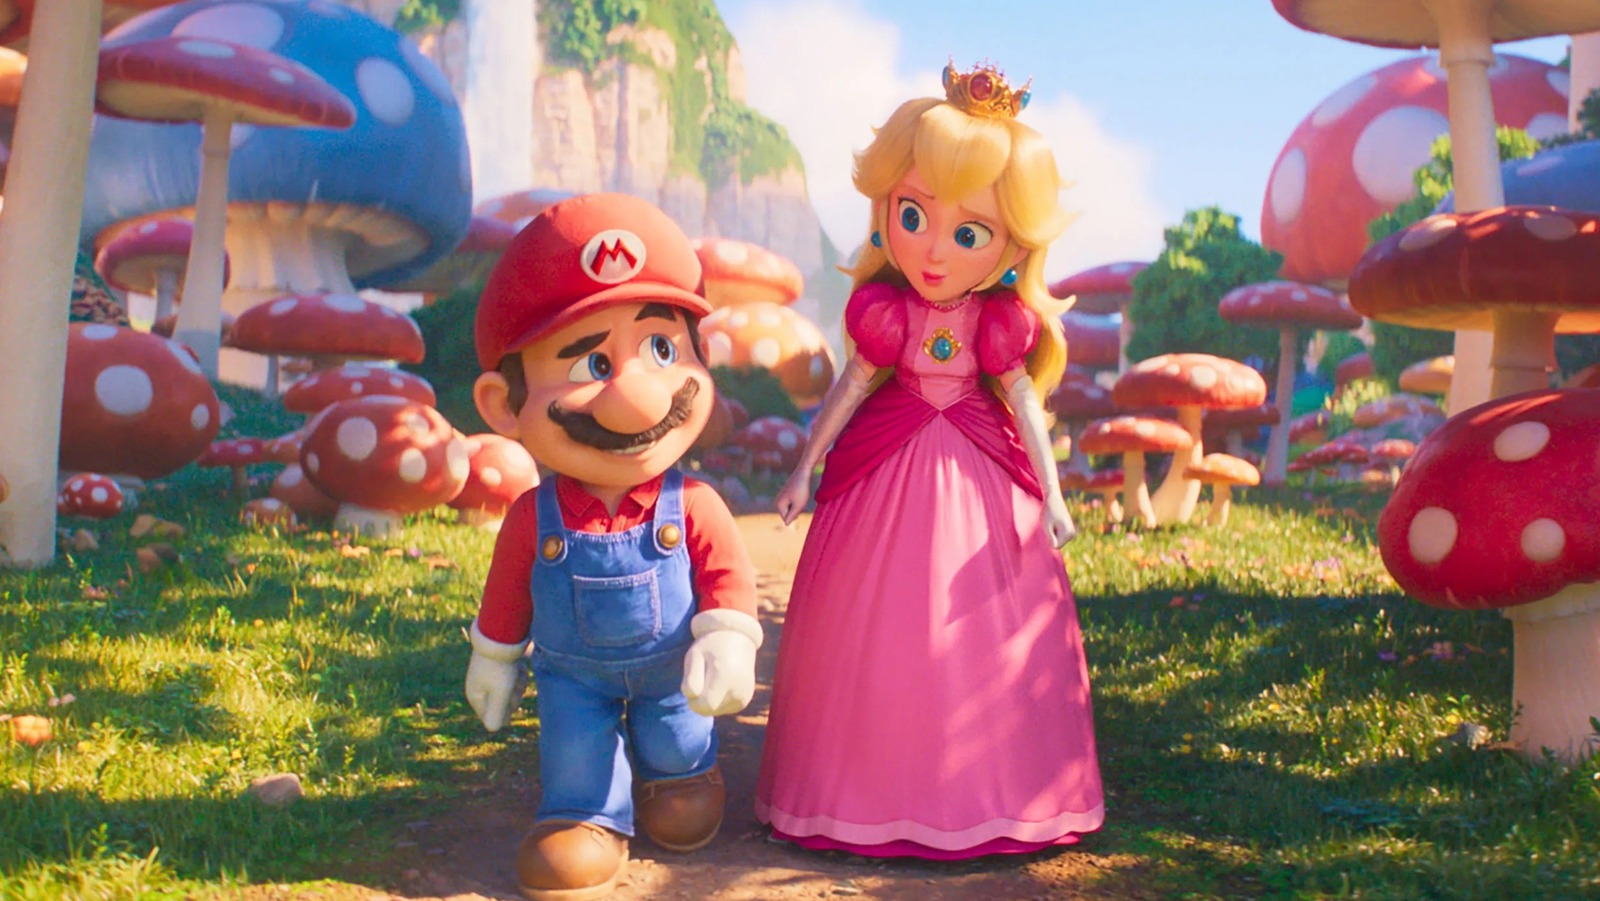 Jack Black's New Super Mario Bros Song 'Peaches' Is Unhinged As Hell